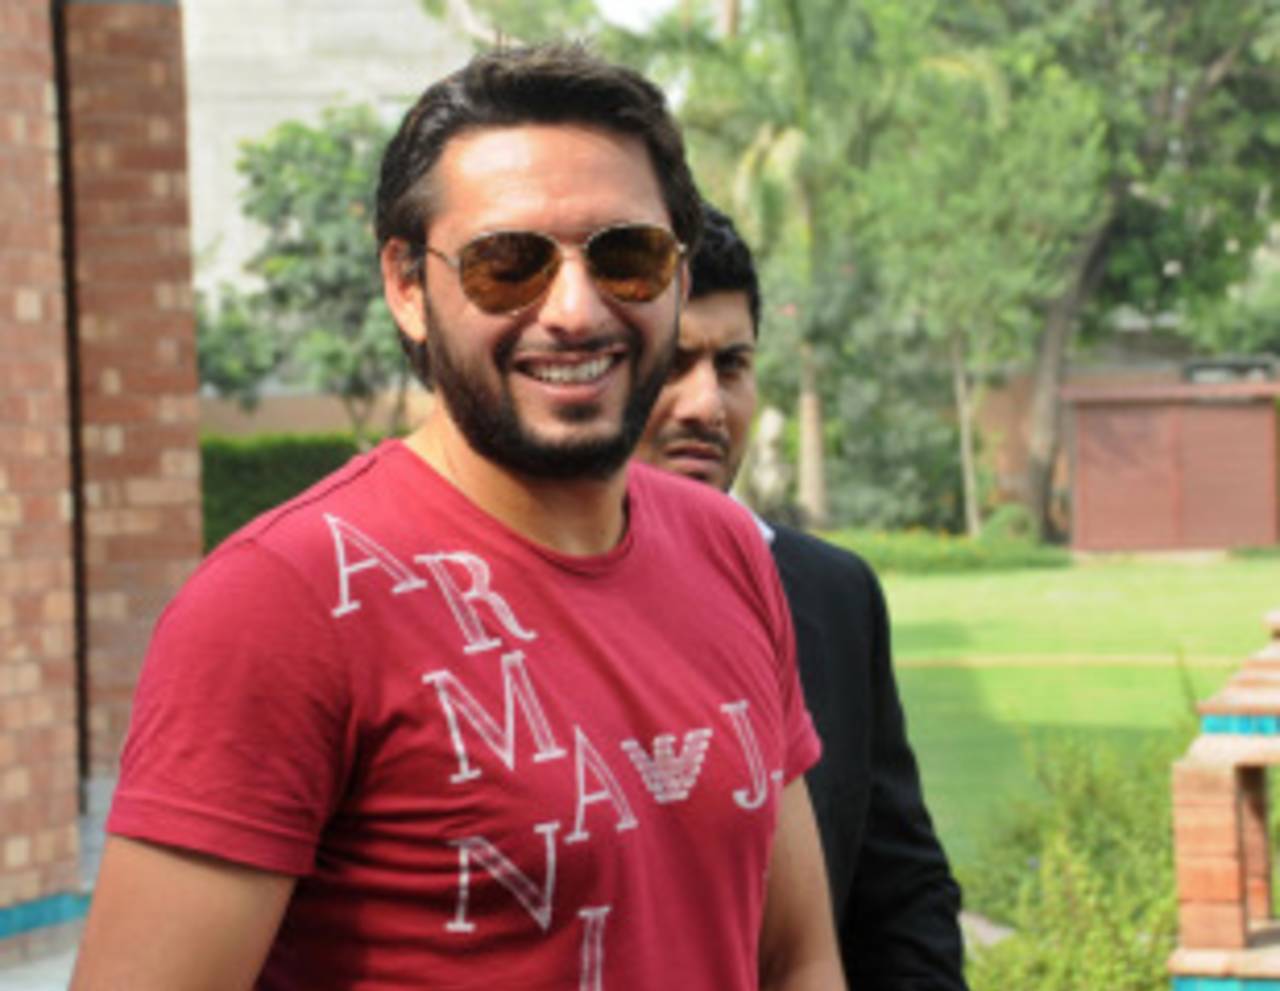 Shahid Afridi meets the media after his disciplinary hearing, Lahore, June 16, 2011